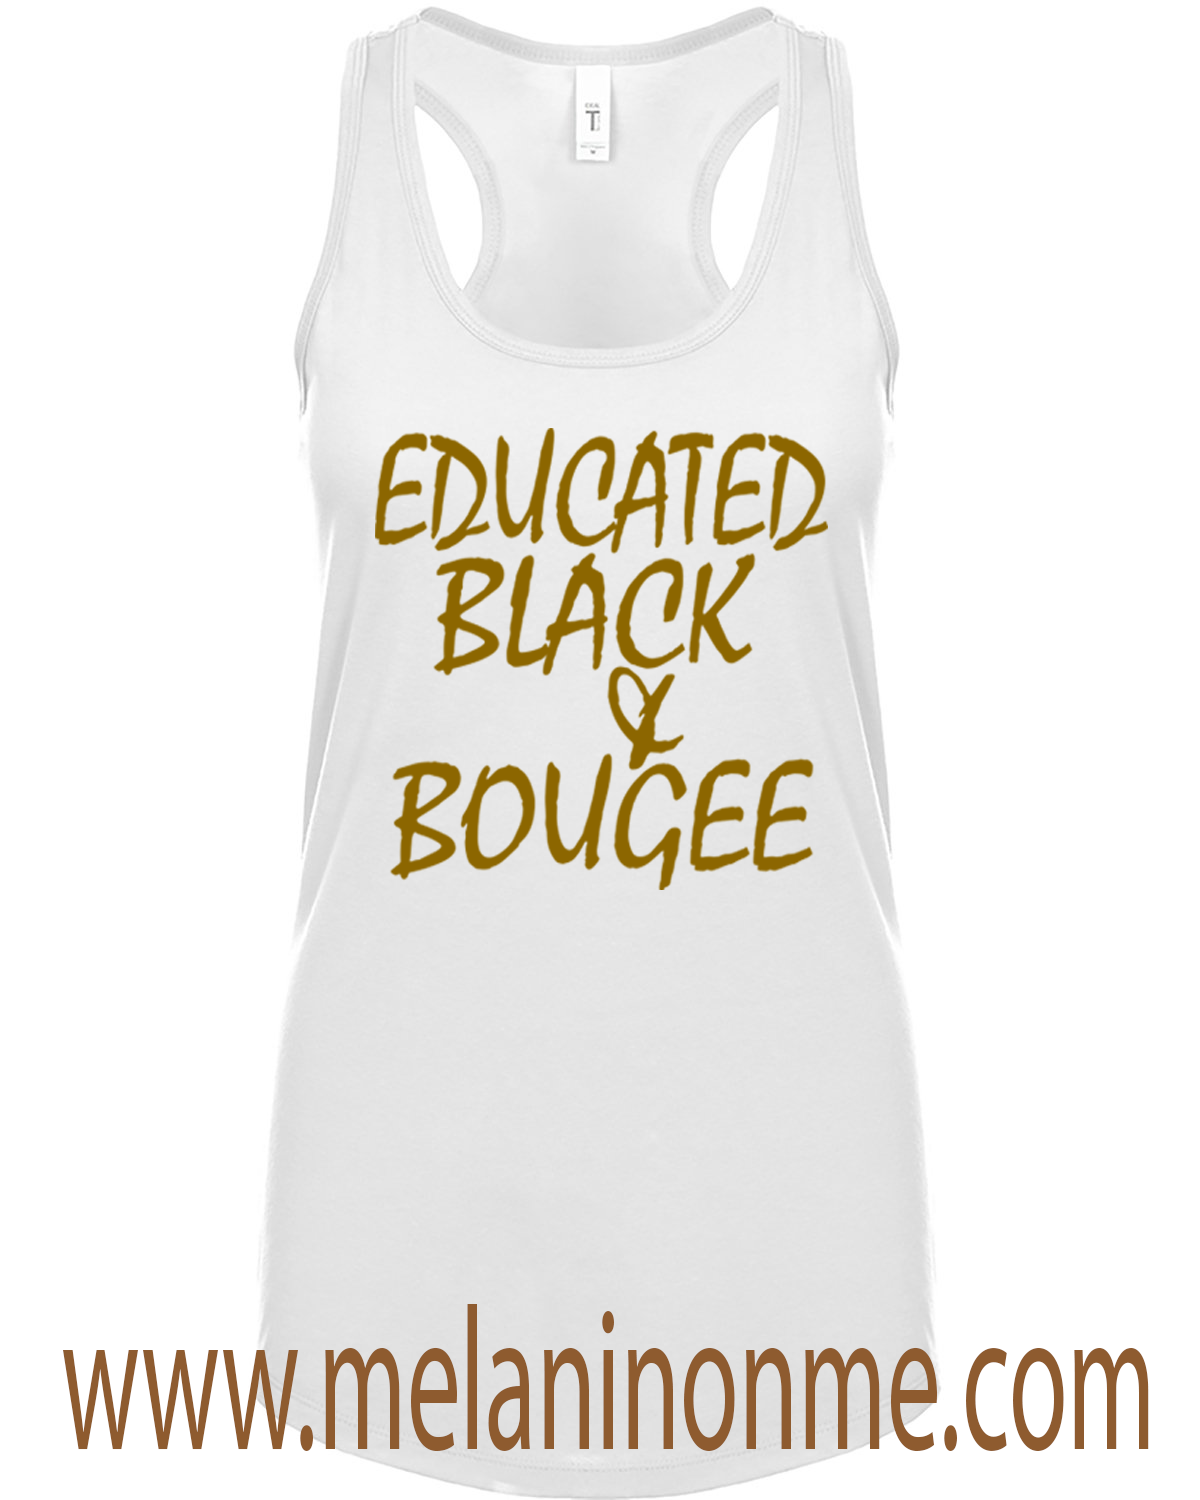 Educated Black Bougee Dope Tank Top